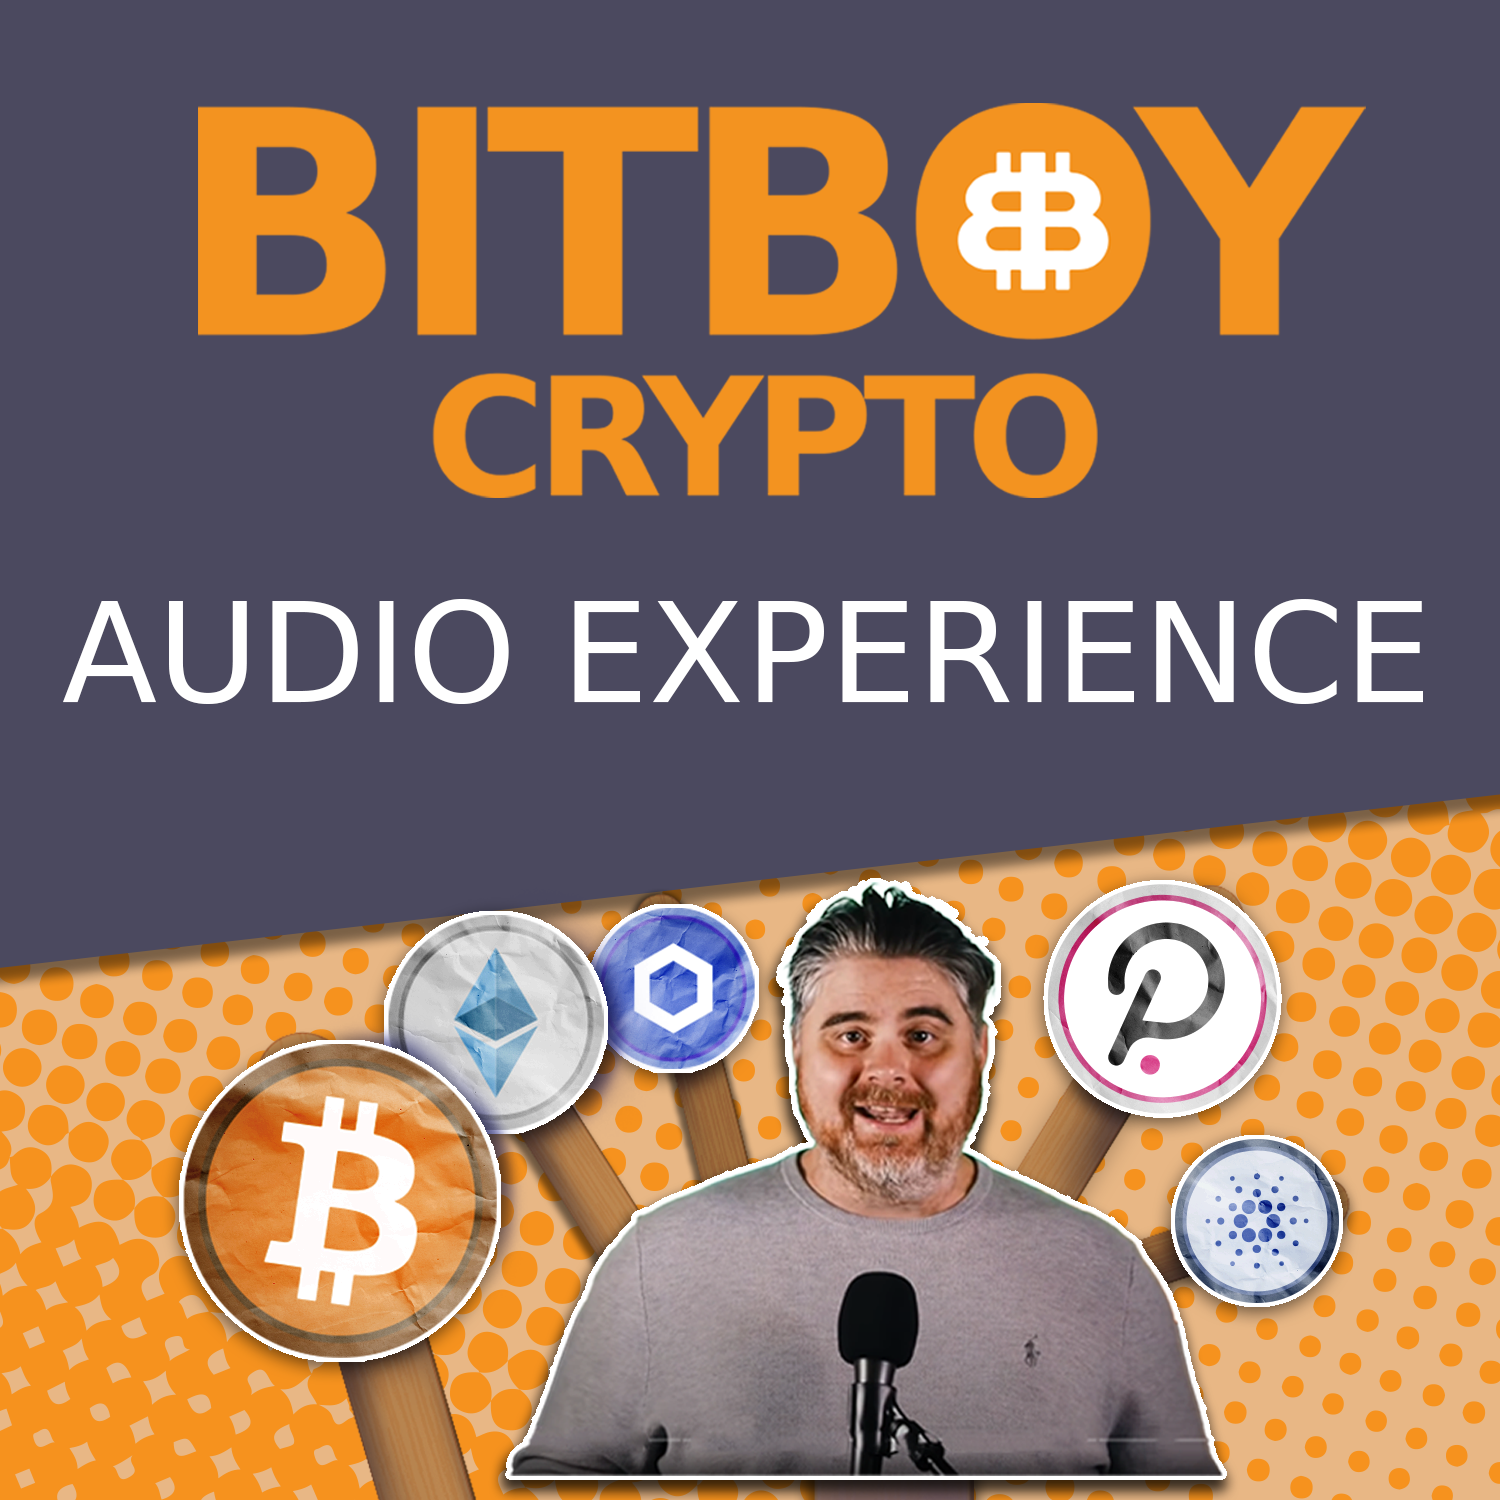 Fresh update on "one more thing" discussed on The Bitboy Crypto Podcast